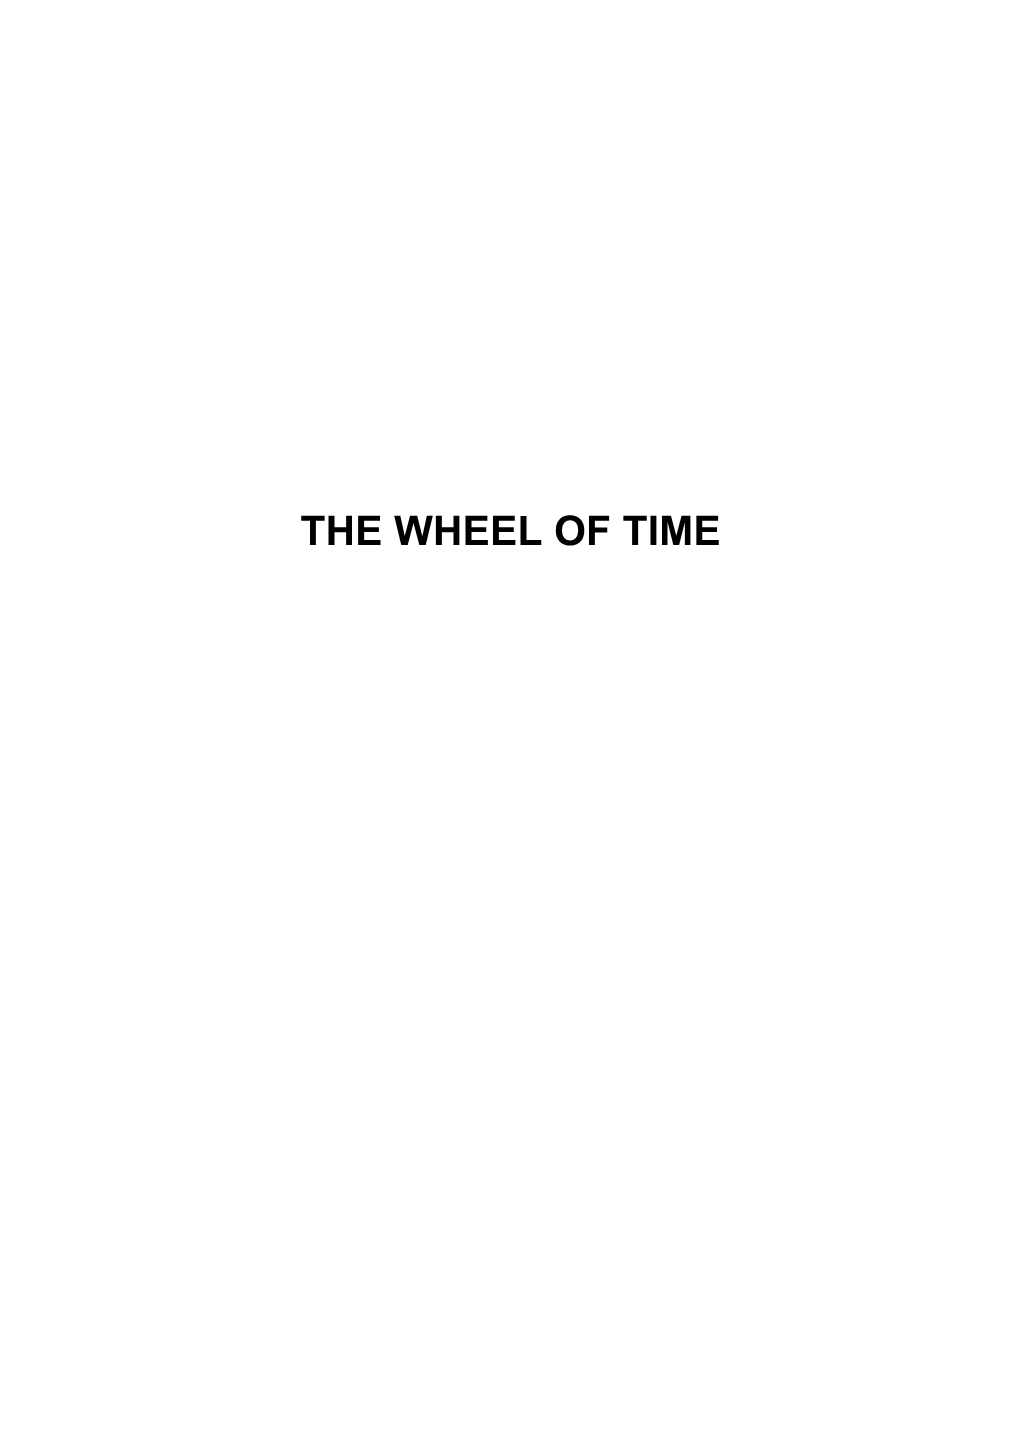 The Wheel of Time Int